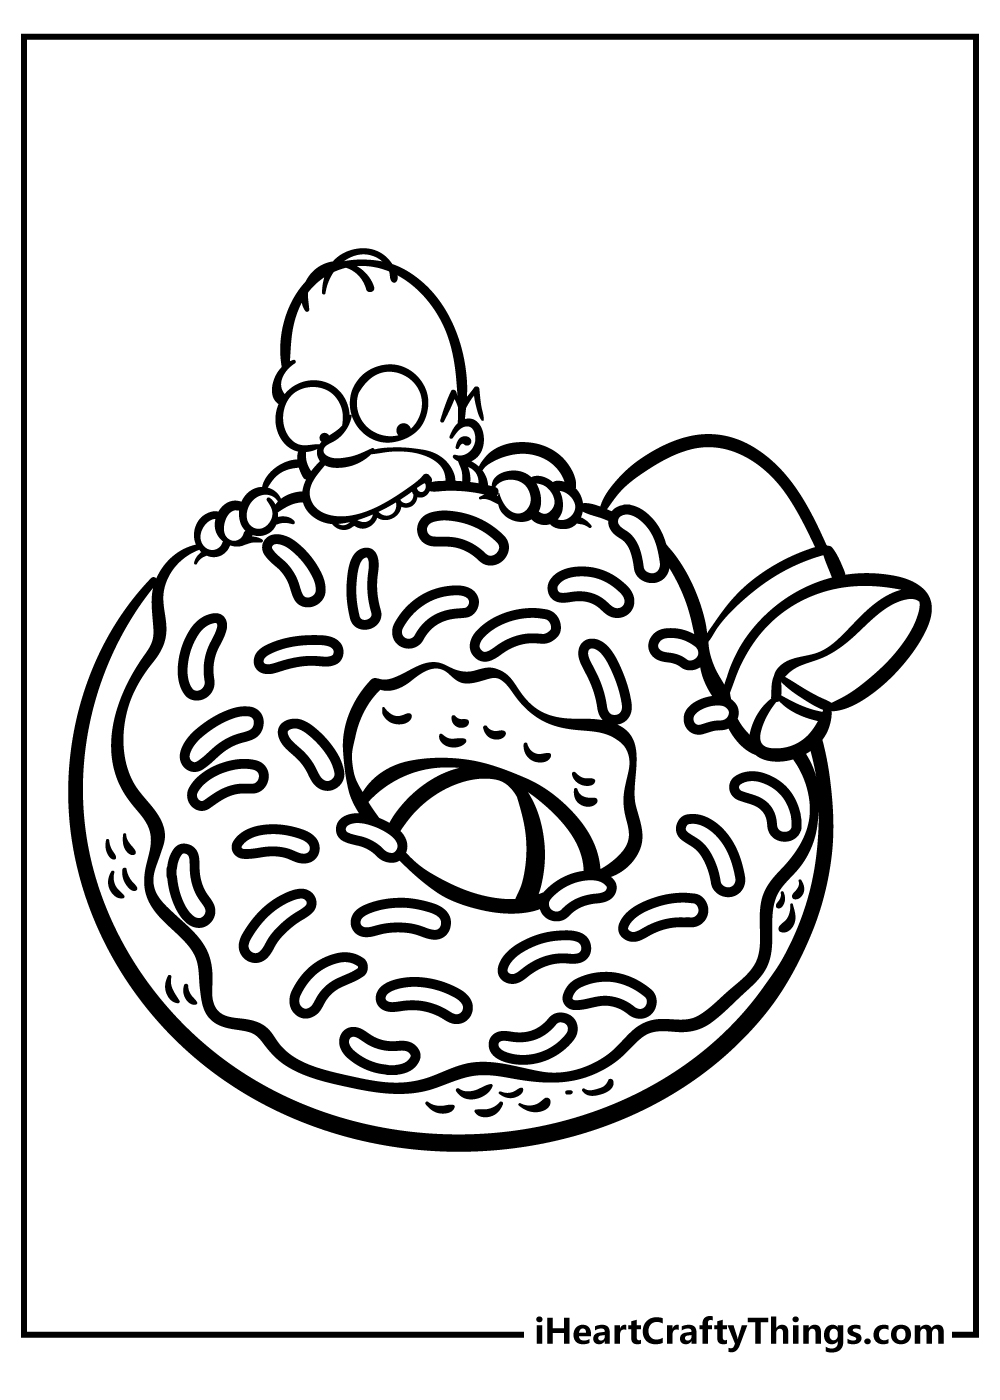 Simpsons Coloring Pages free pdf download